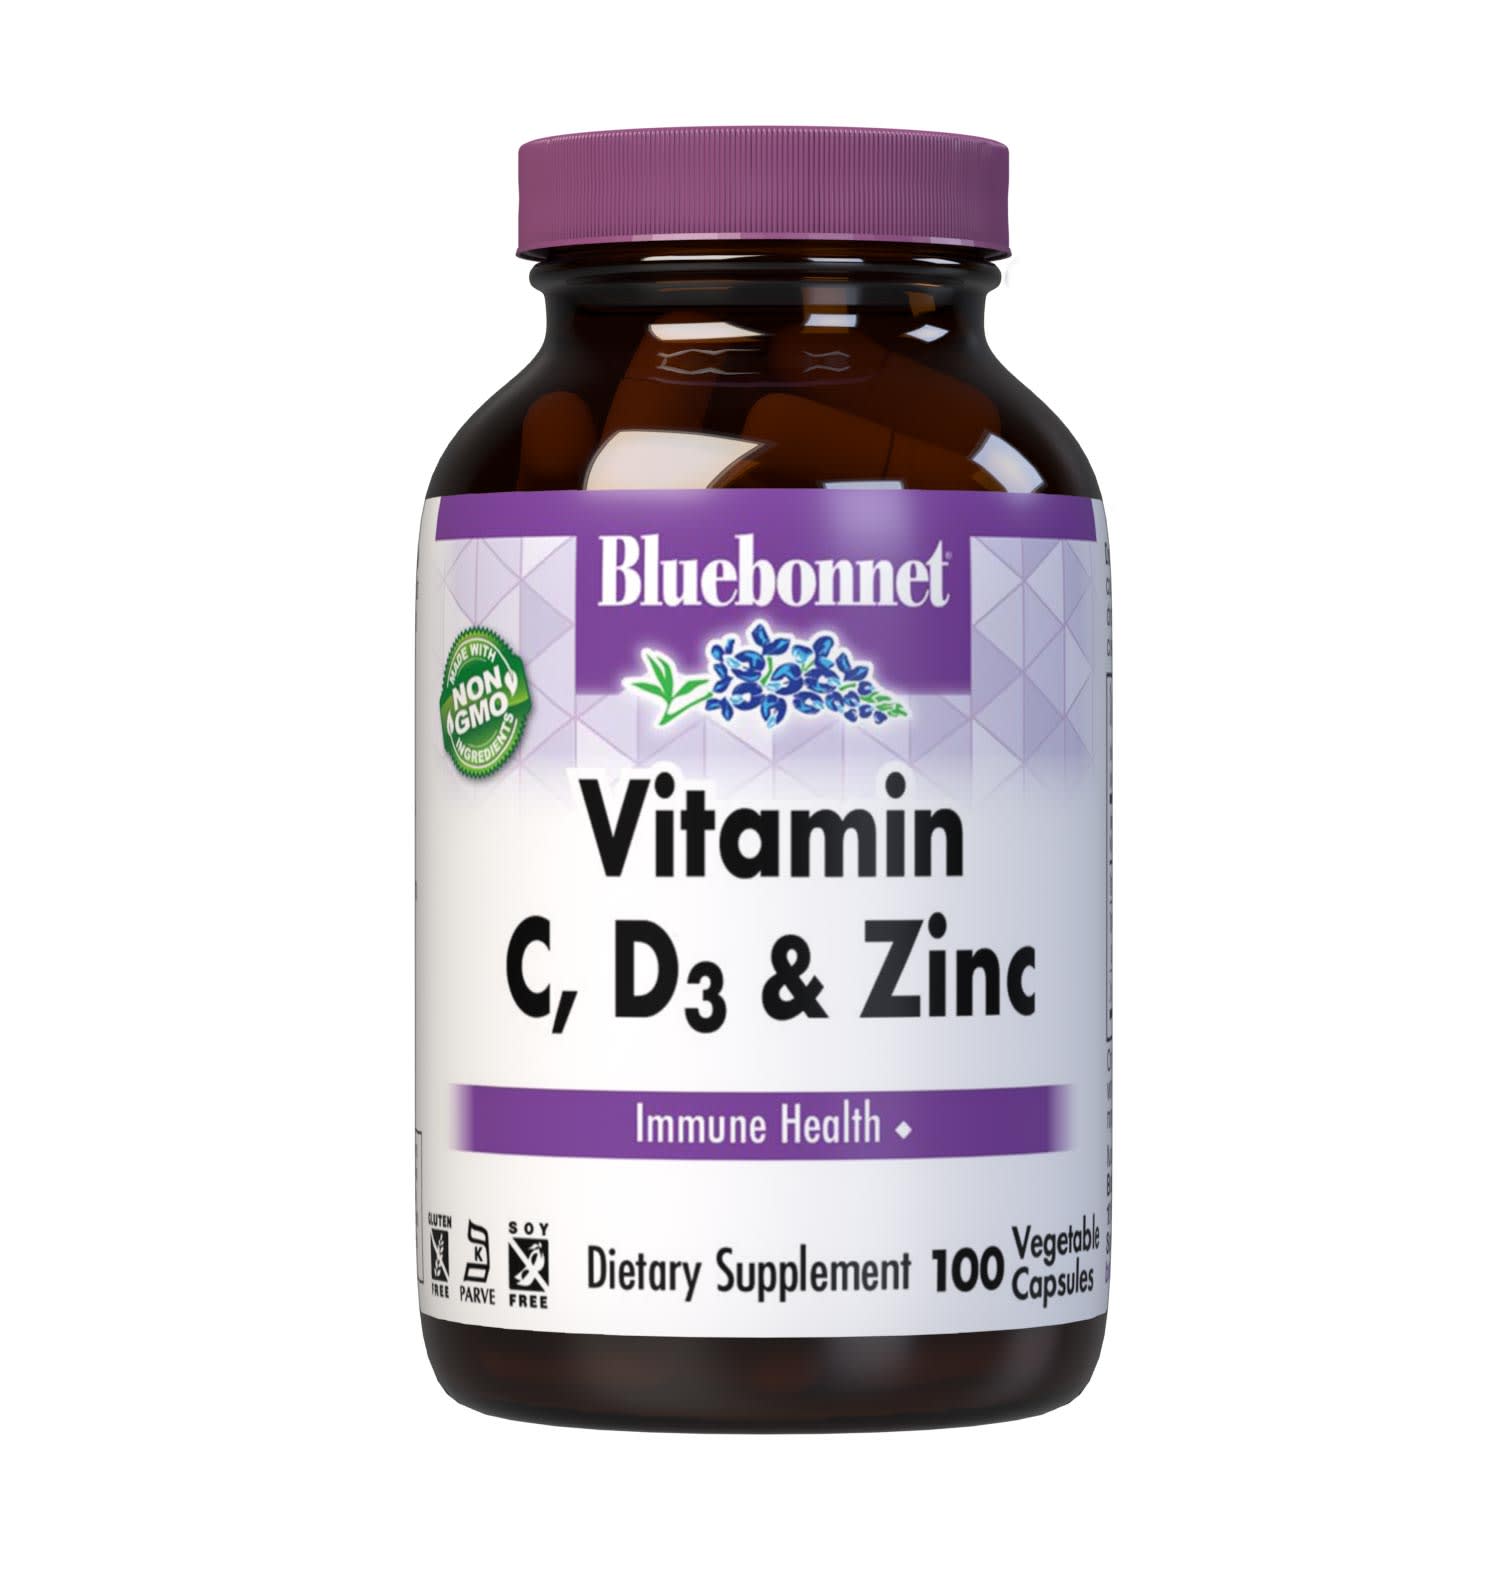 Bluebonnet’s Vitamin C, D3 & Zinc 100 Vegetable Capsules are specially formulated with antioxidants and immune nutrients-vitamin C, vitamin D3 and zinc to support immune health and well being.  #size_100 count